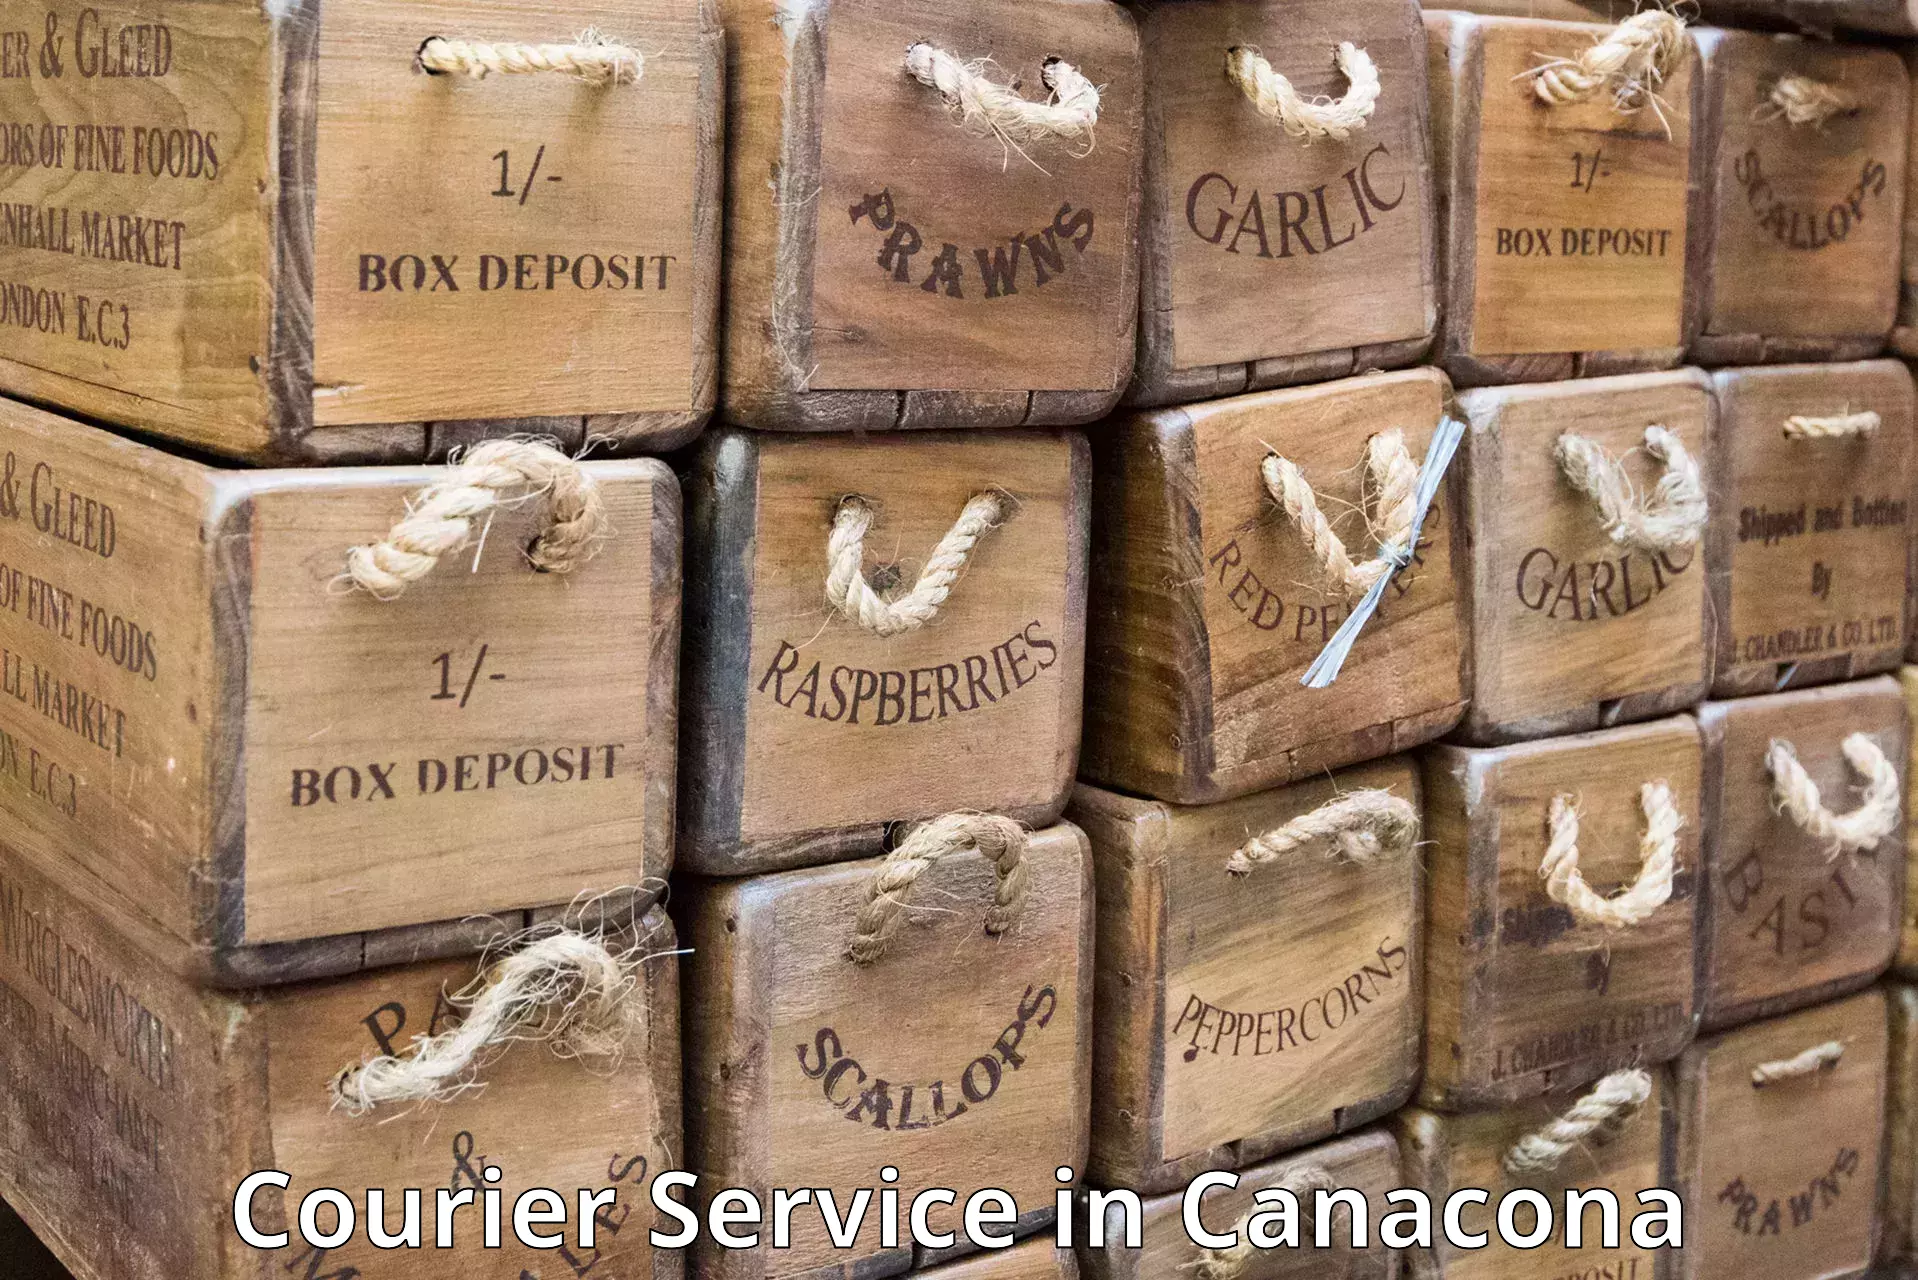 Customer-friendly courier services in Canacona